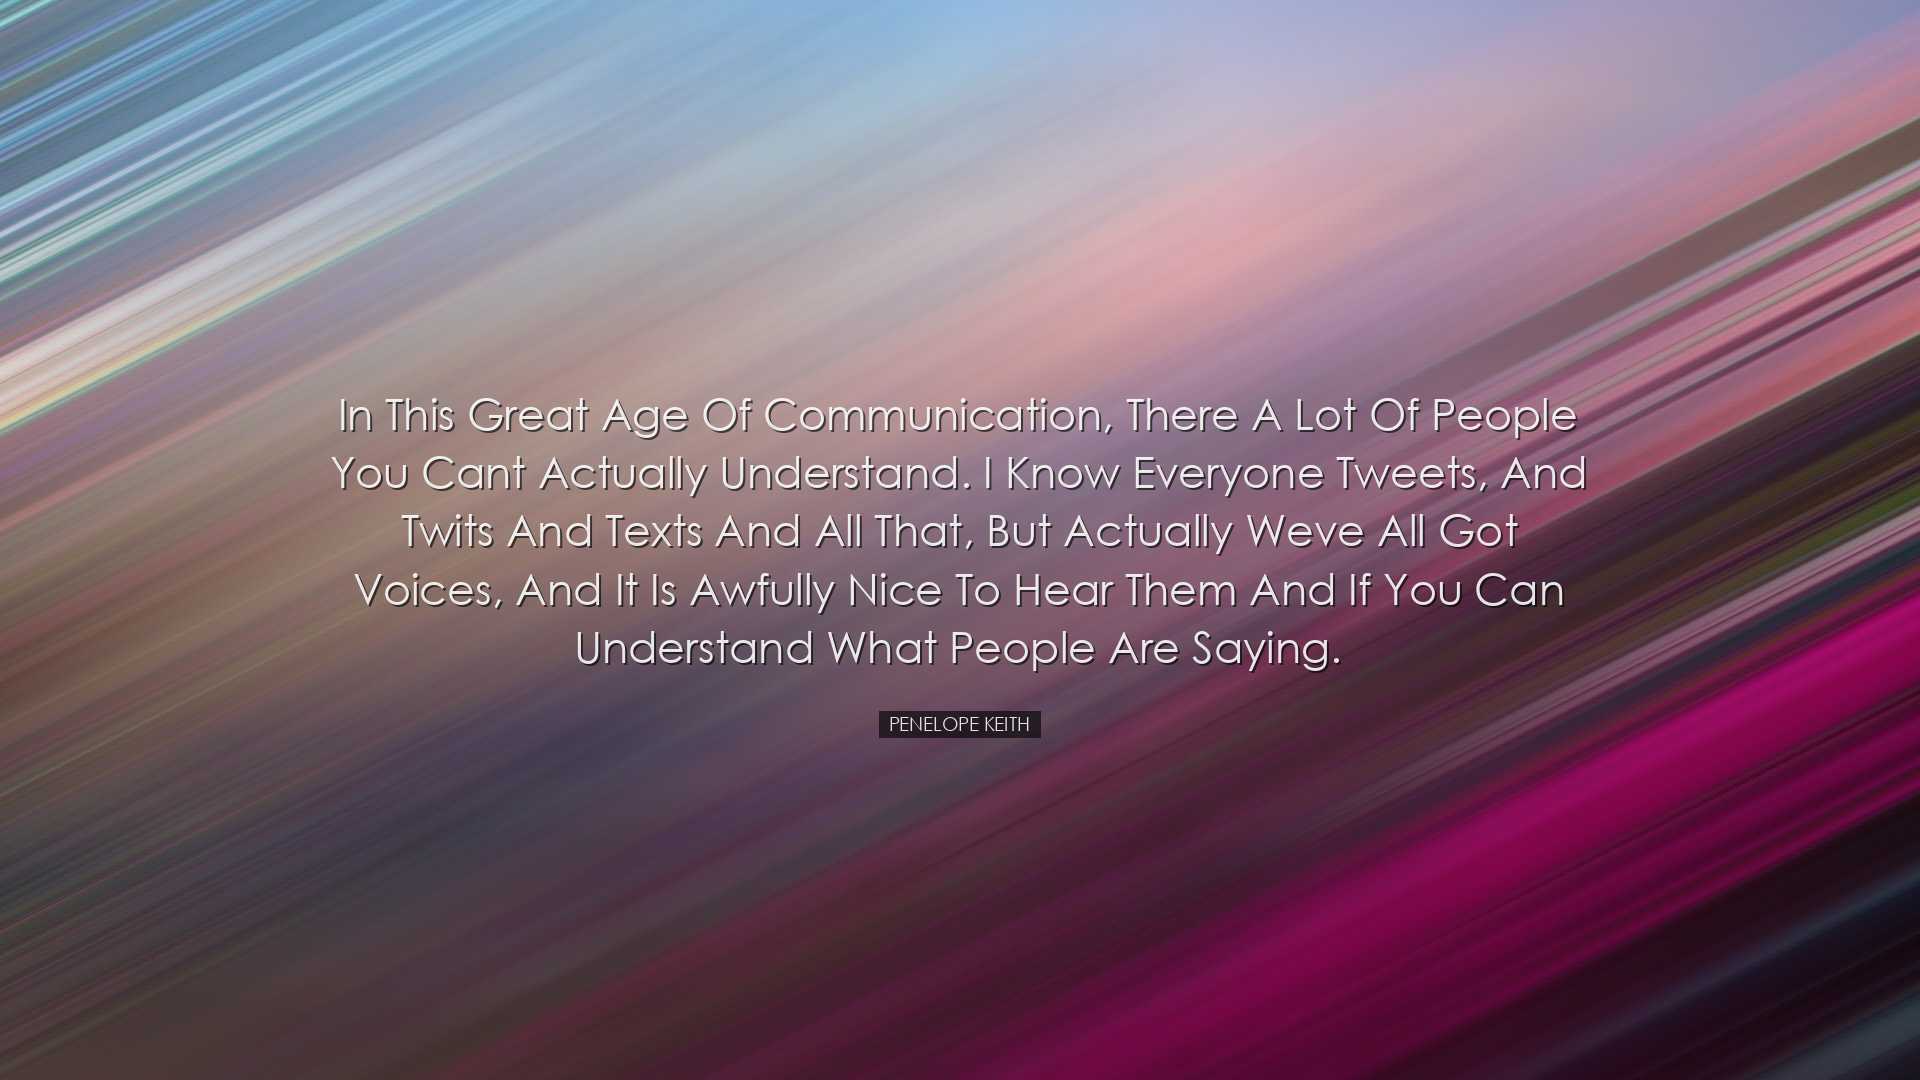 In this great age of communication, there a lot of people you cant